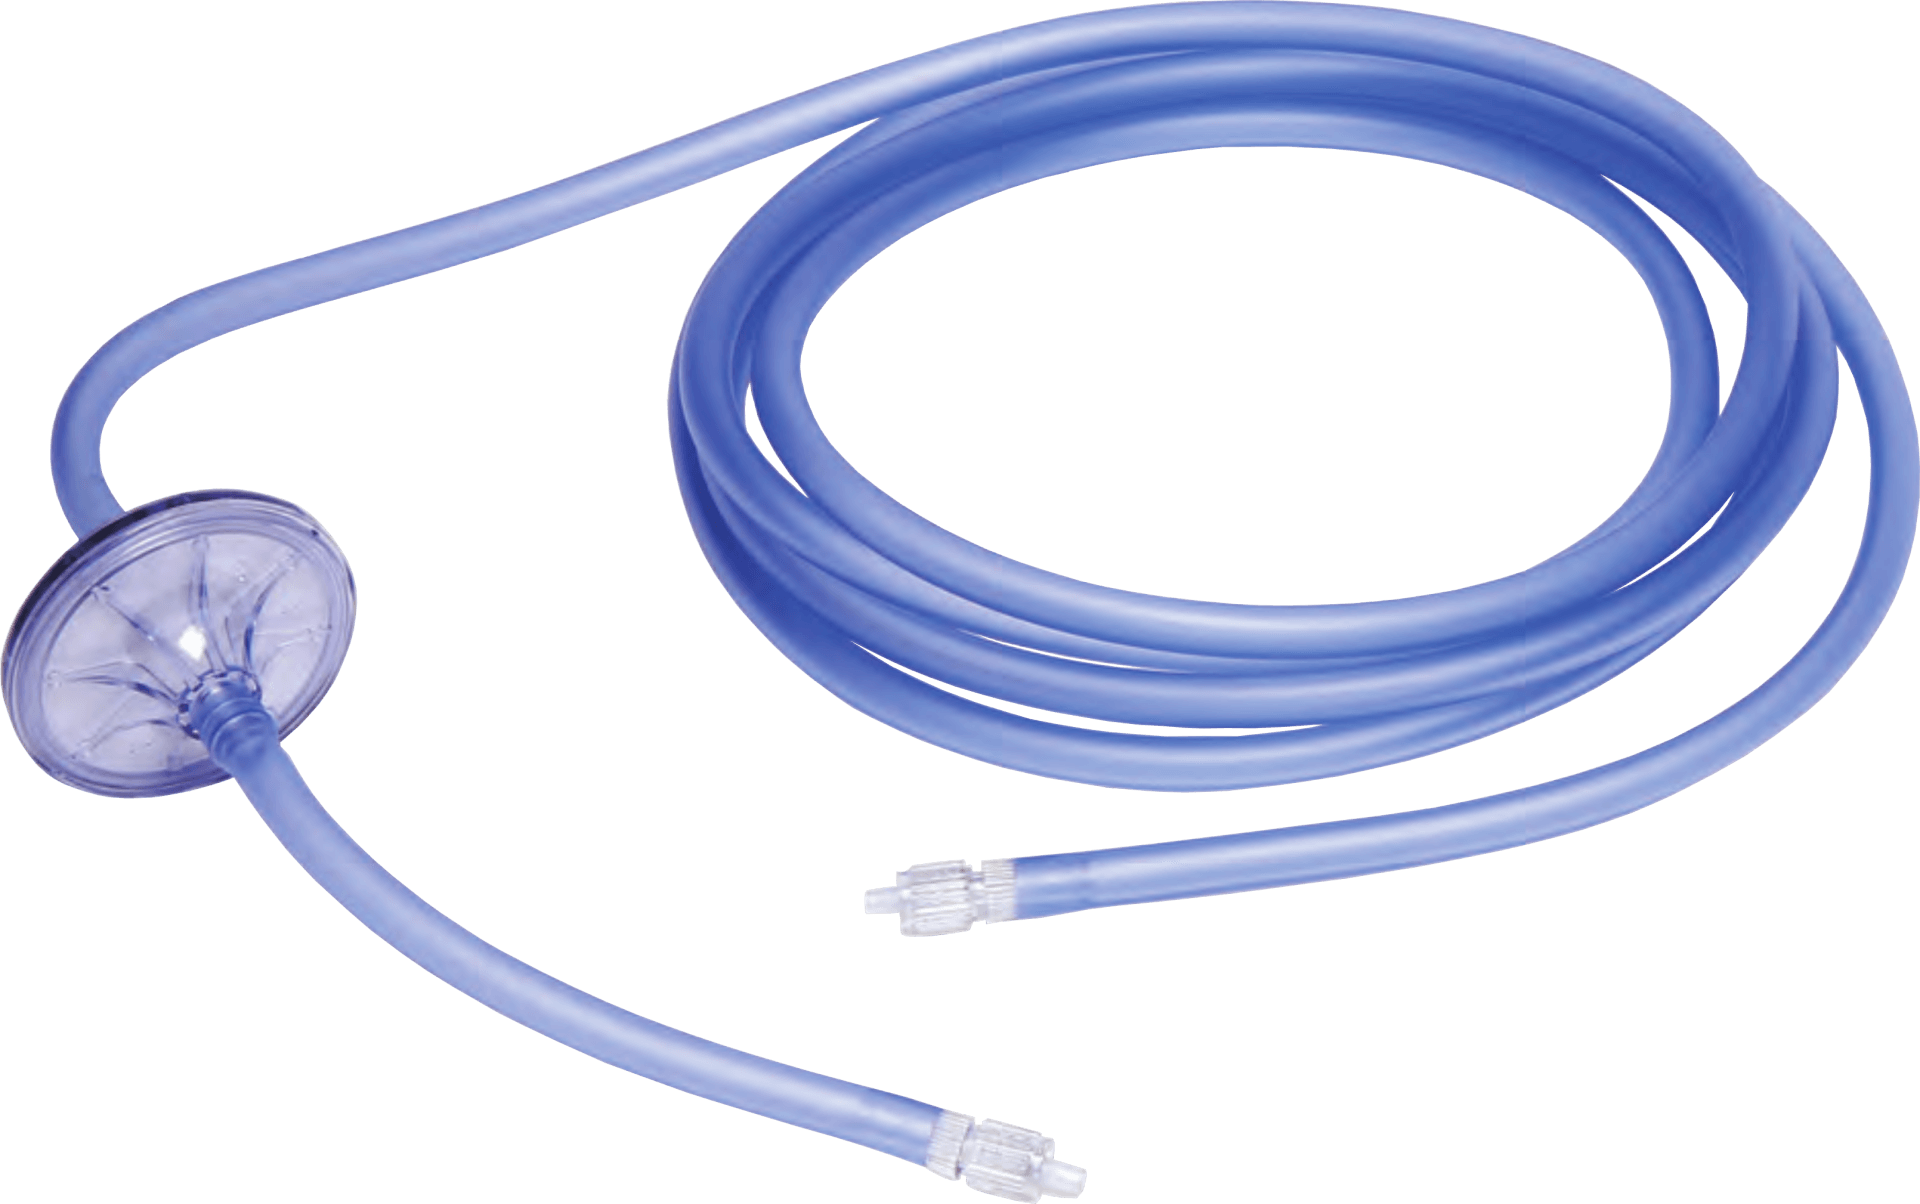 Locamed insufflation tubing, gas tubing, with filter and connectors